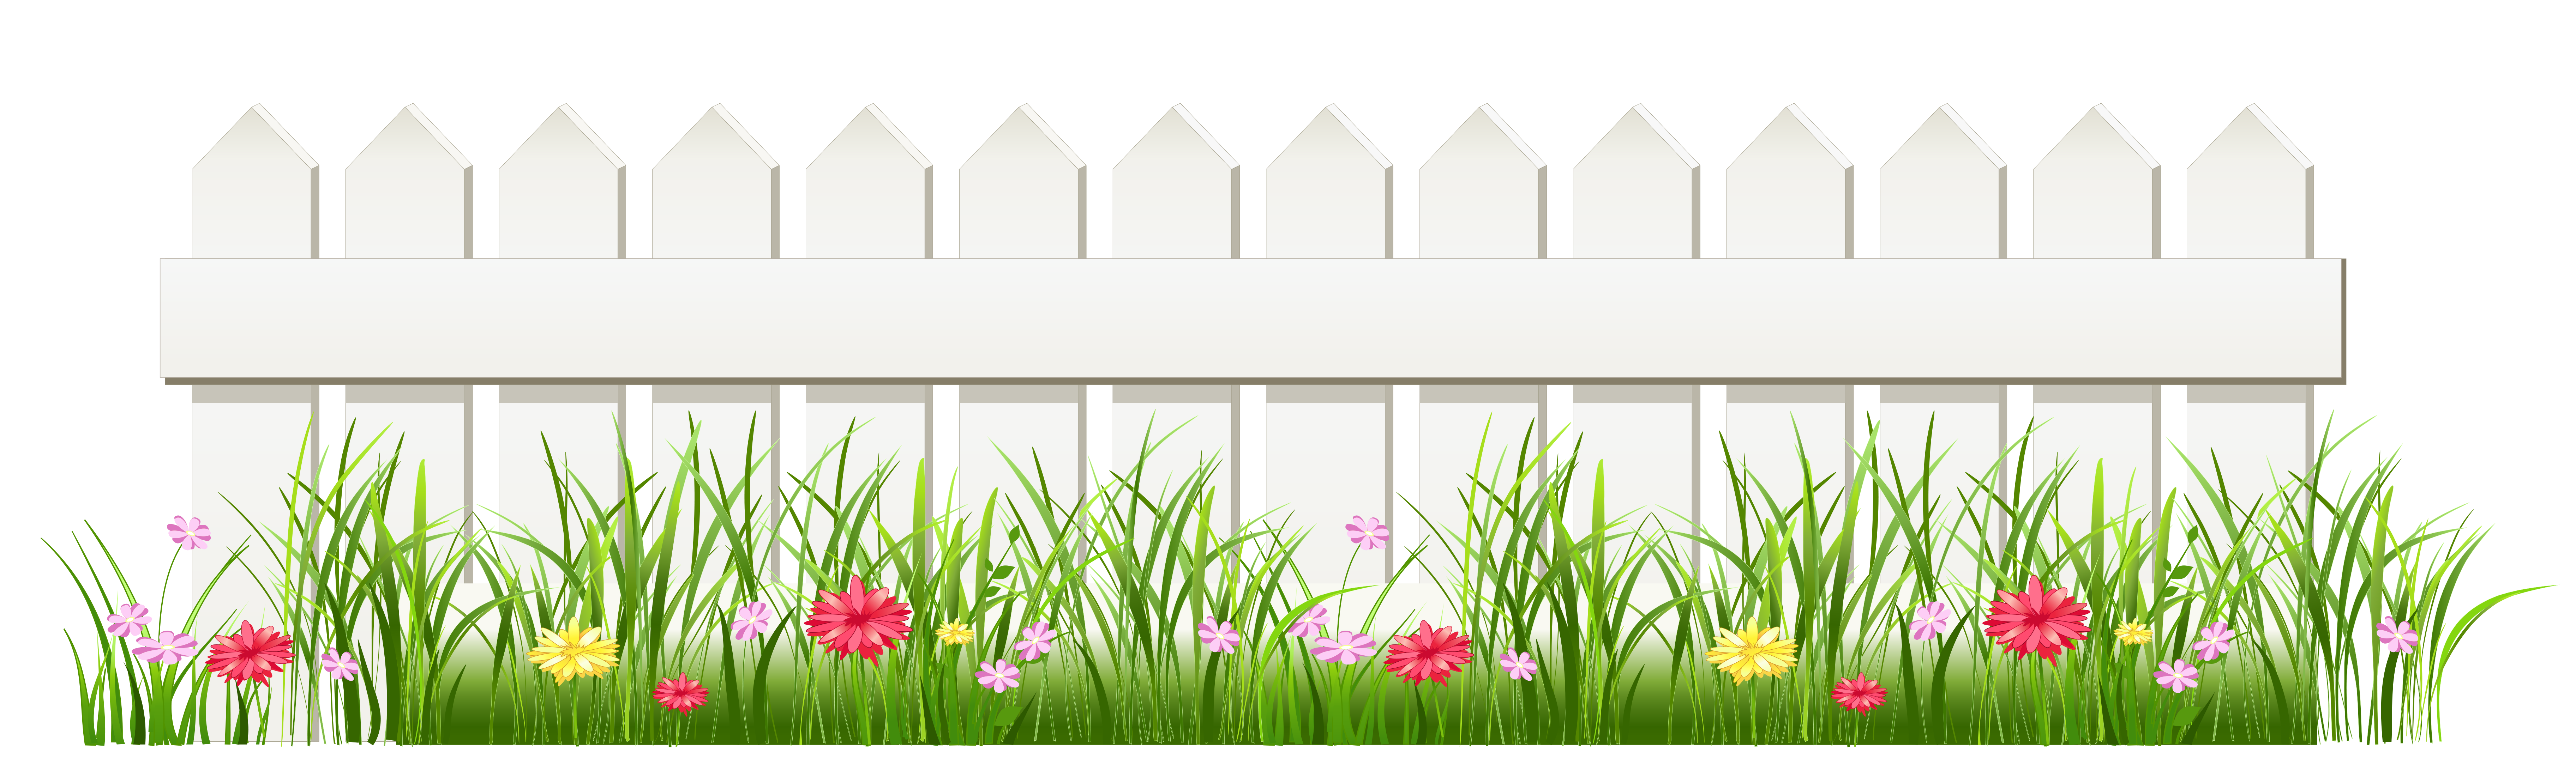 Transparent white with grass. Garden clipart fence